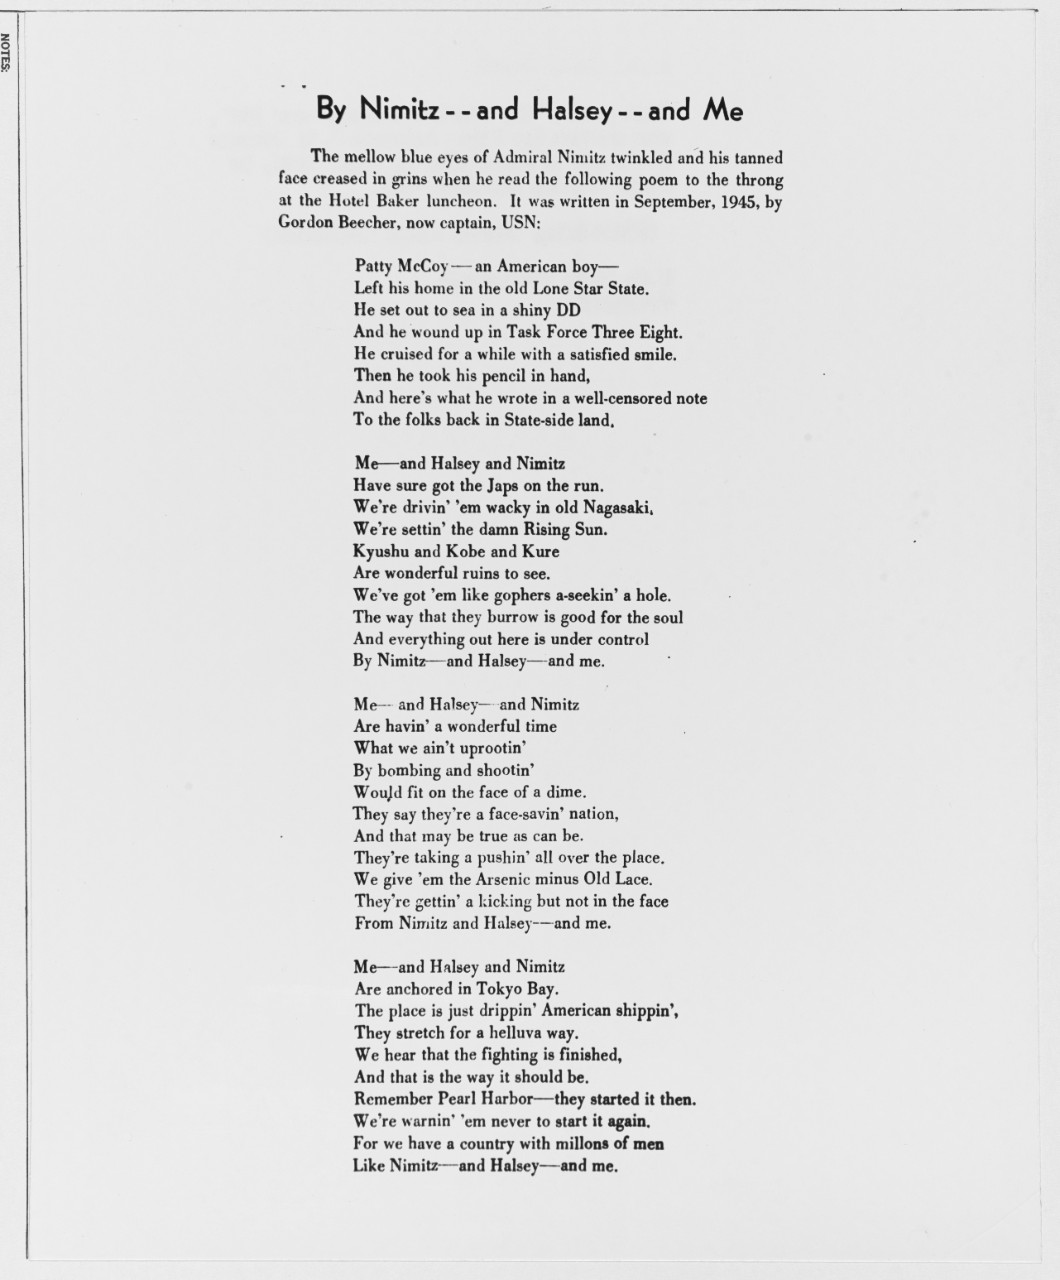 "By Nimitz - and Halsey - and Me" Poem